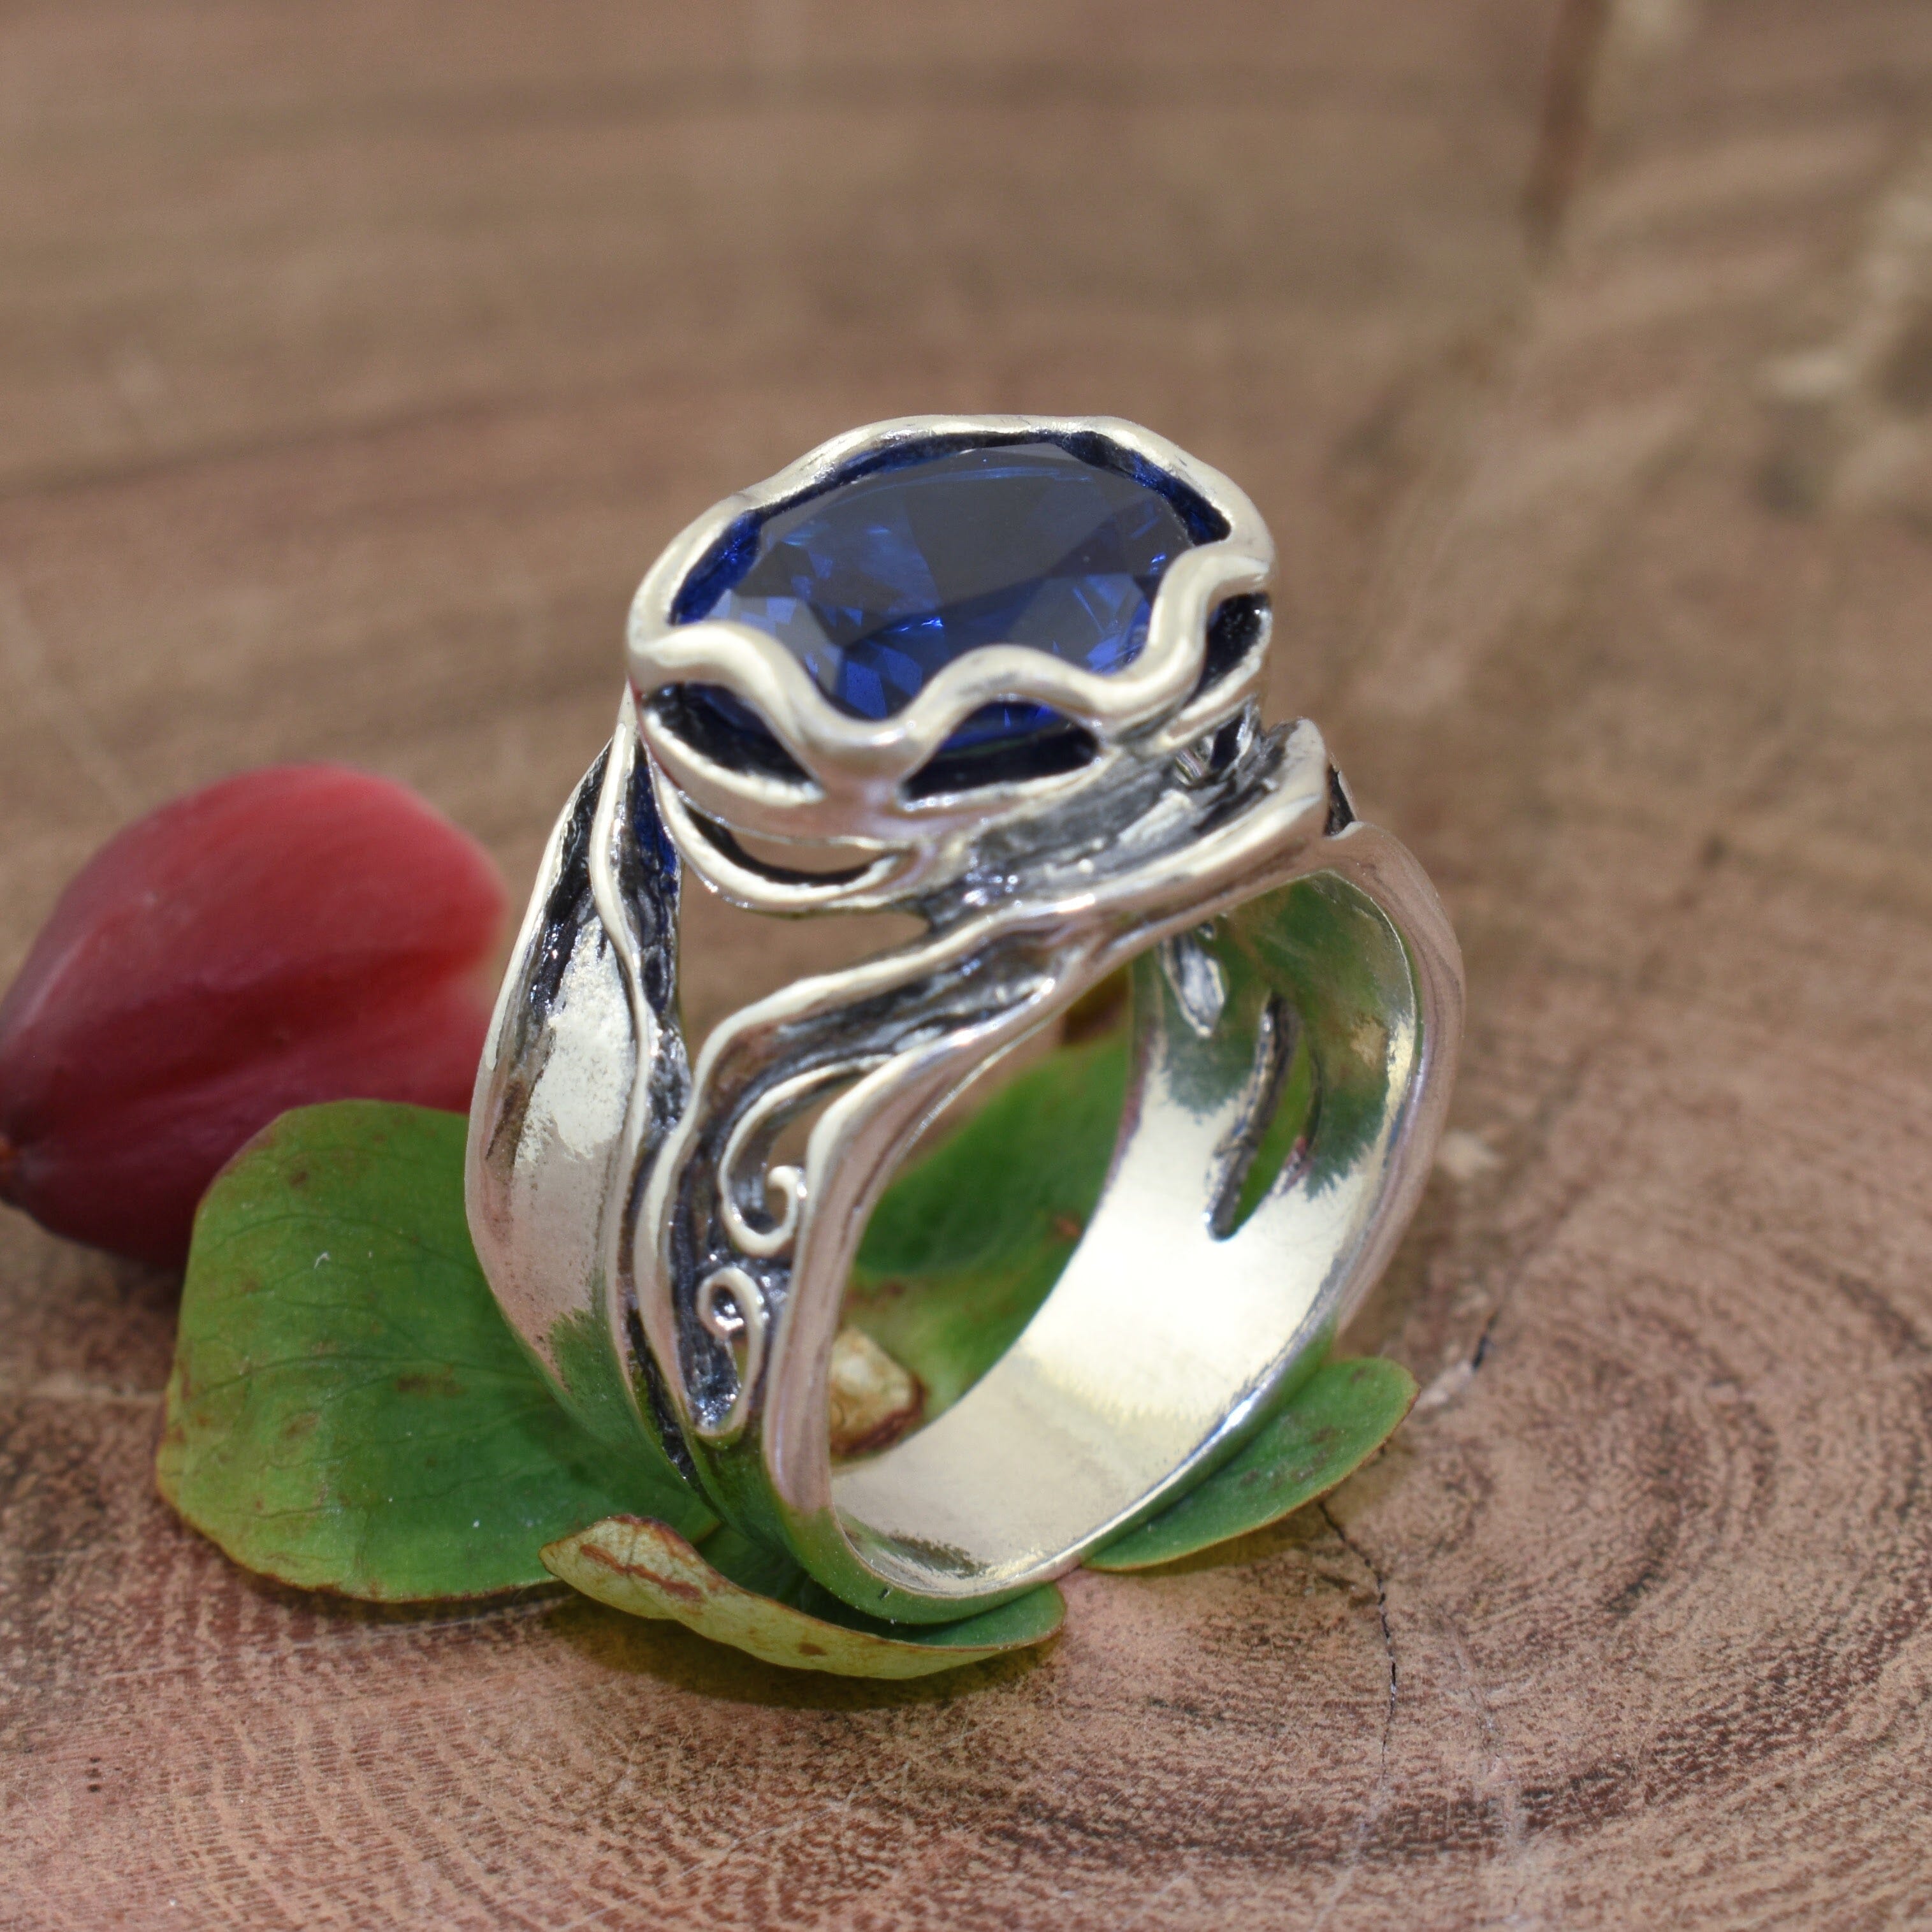 chunky ring with a blue sapphire stone